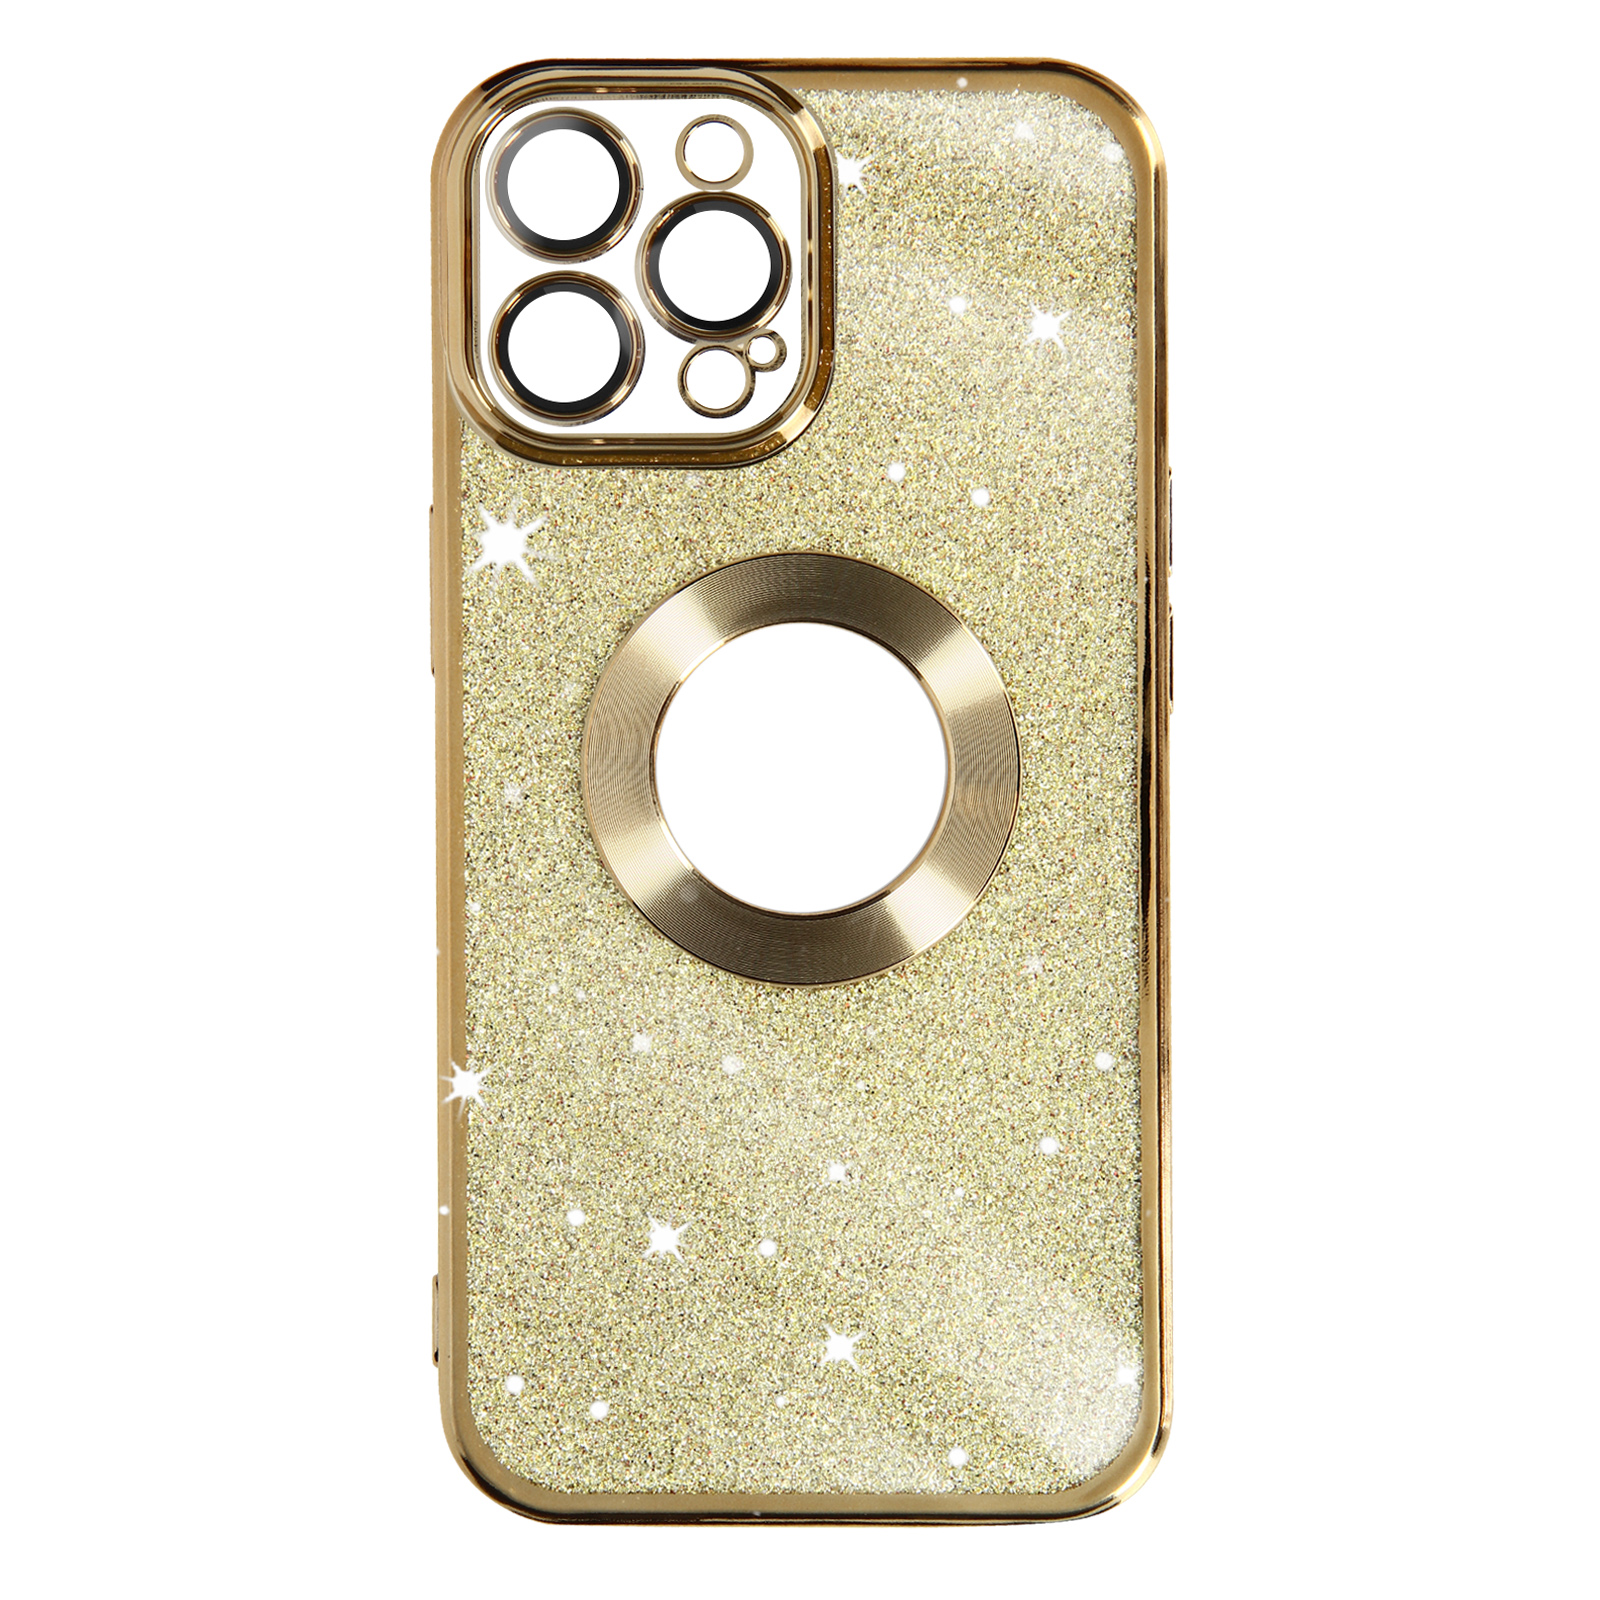 AVIZAR Pro Spark Backcover, Protecam iPhone 13 Series, Max, Apple, Gold